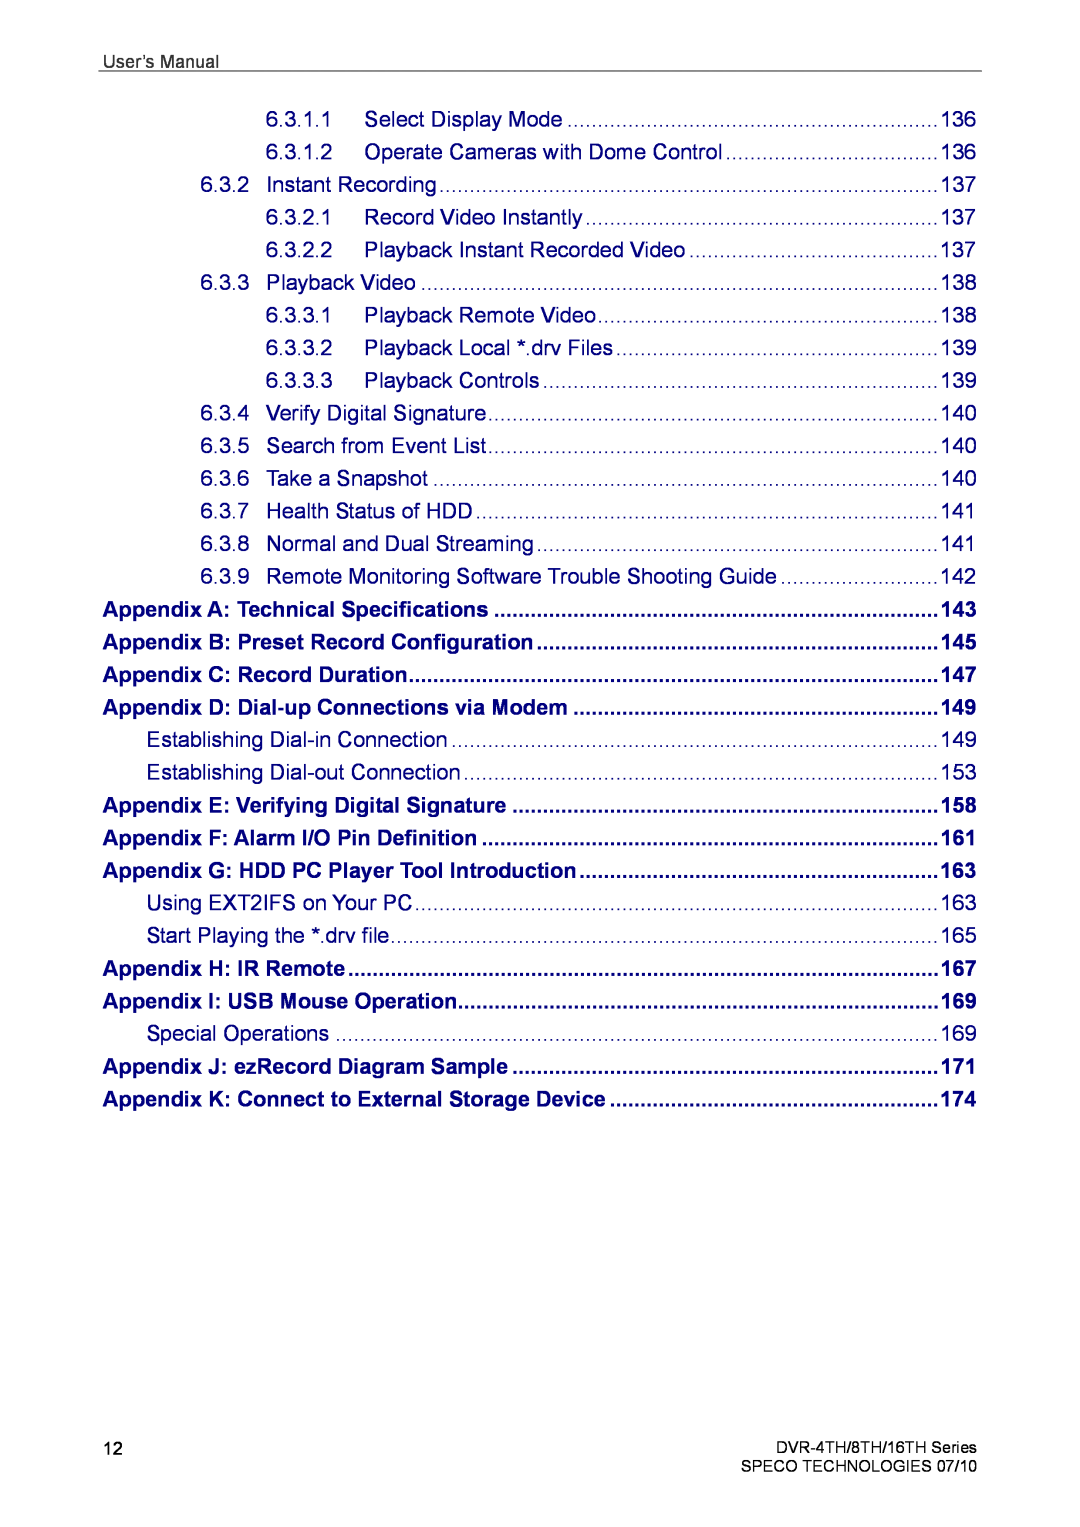 Speco Technologies 4TH, 8TH, 16TH user manual Appendix A Technical Specifications 